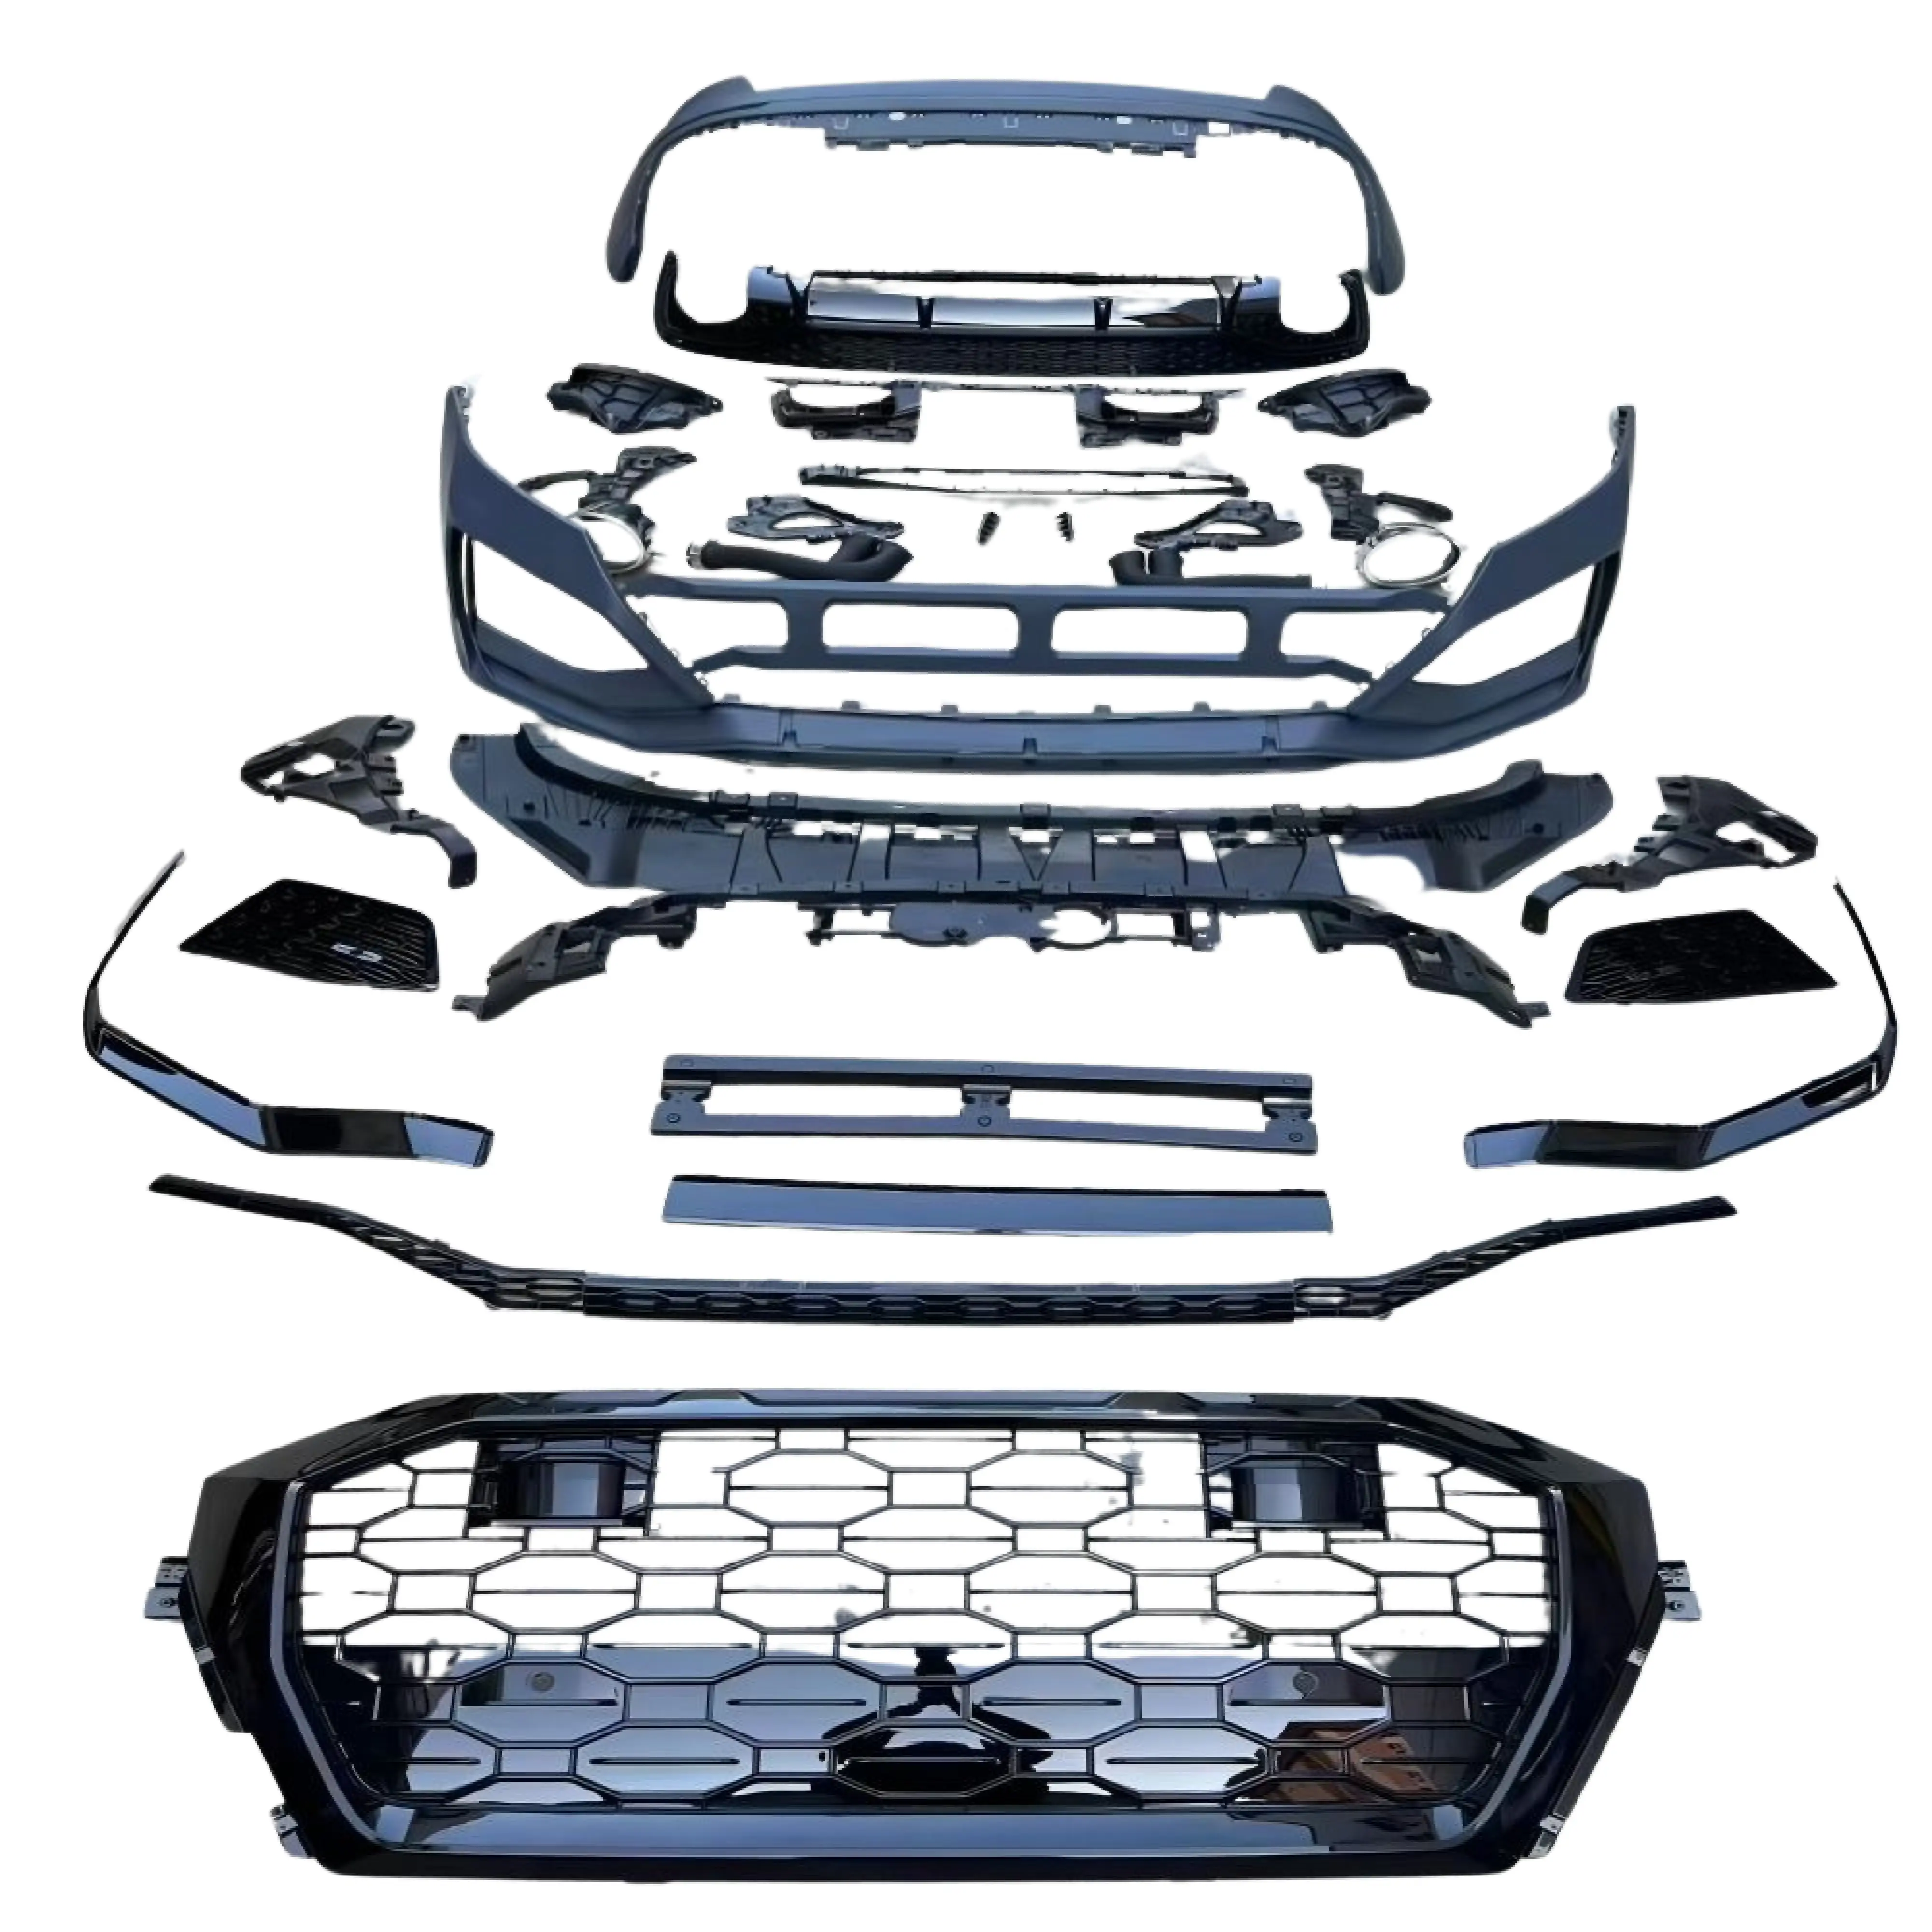 Q8 RSQ8 full body kit front bumper rear bumper car set with grille for Audi Q8 2020 20212022